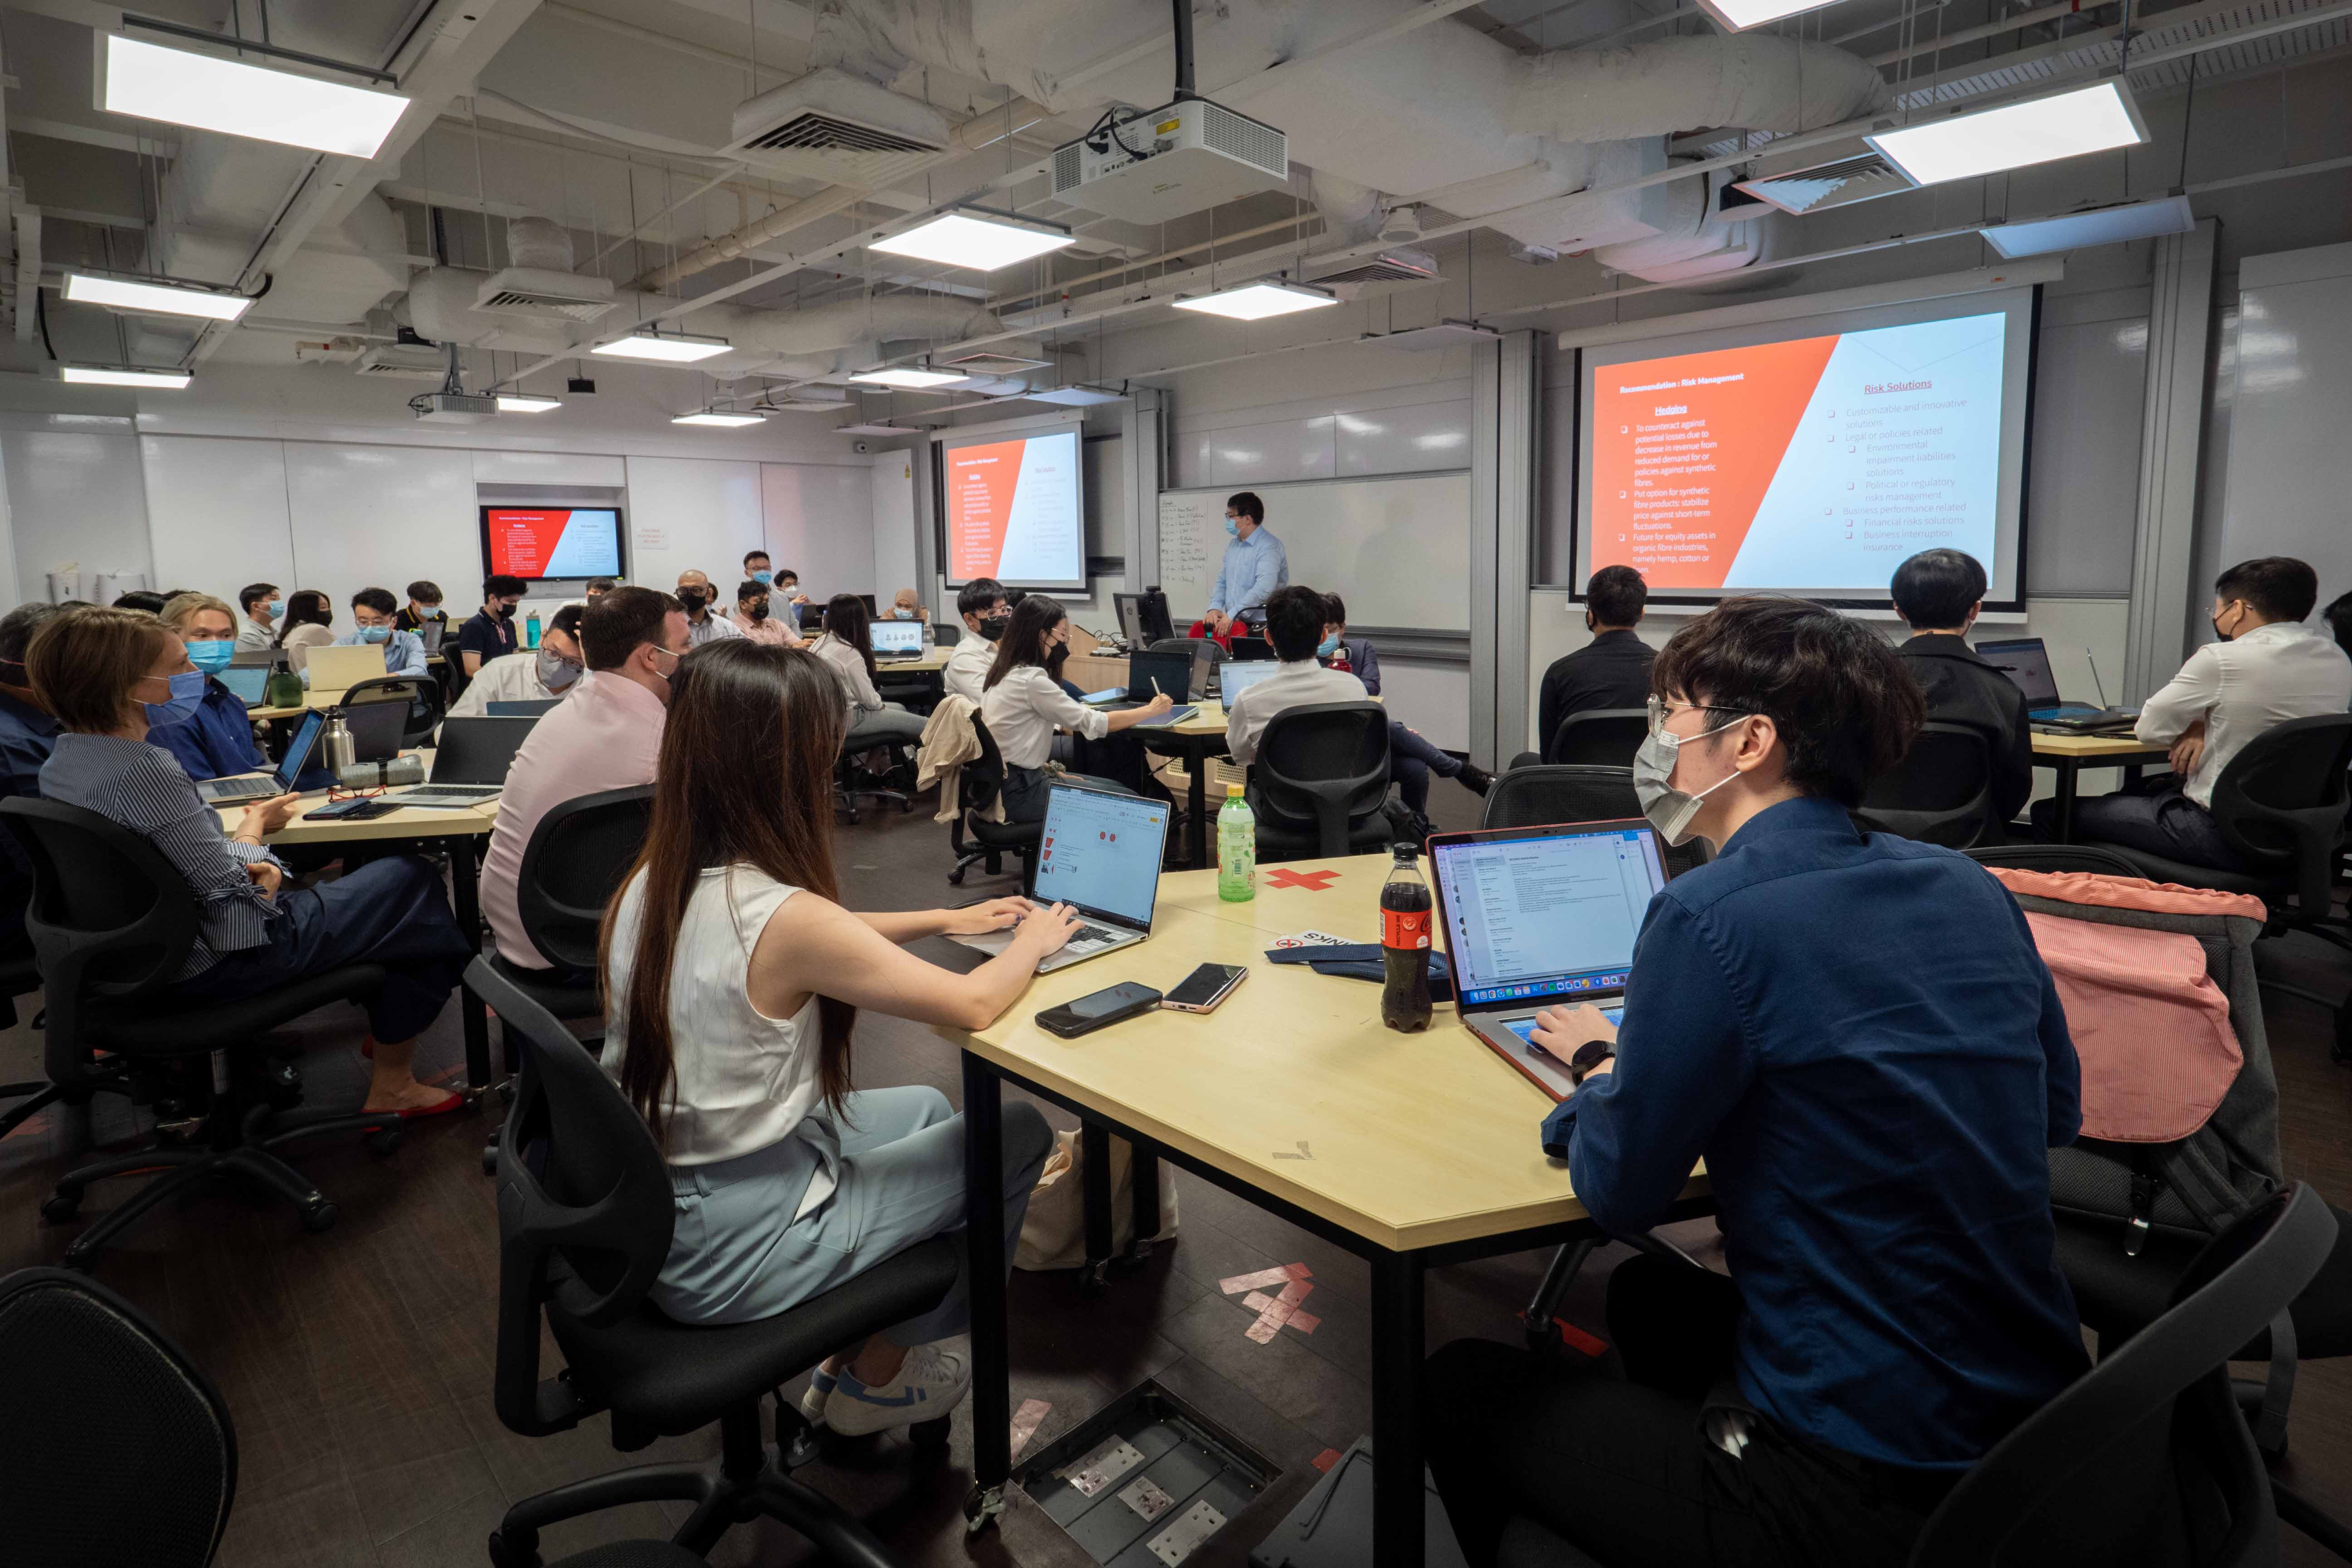 The rise of massive open online courses, especially in the last two years, and the disruptions brought on by Covid-19 have again raised questions about whether traditional universities, including those in Singapore, are doing enough to adapt to the changing face of higher education.